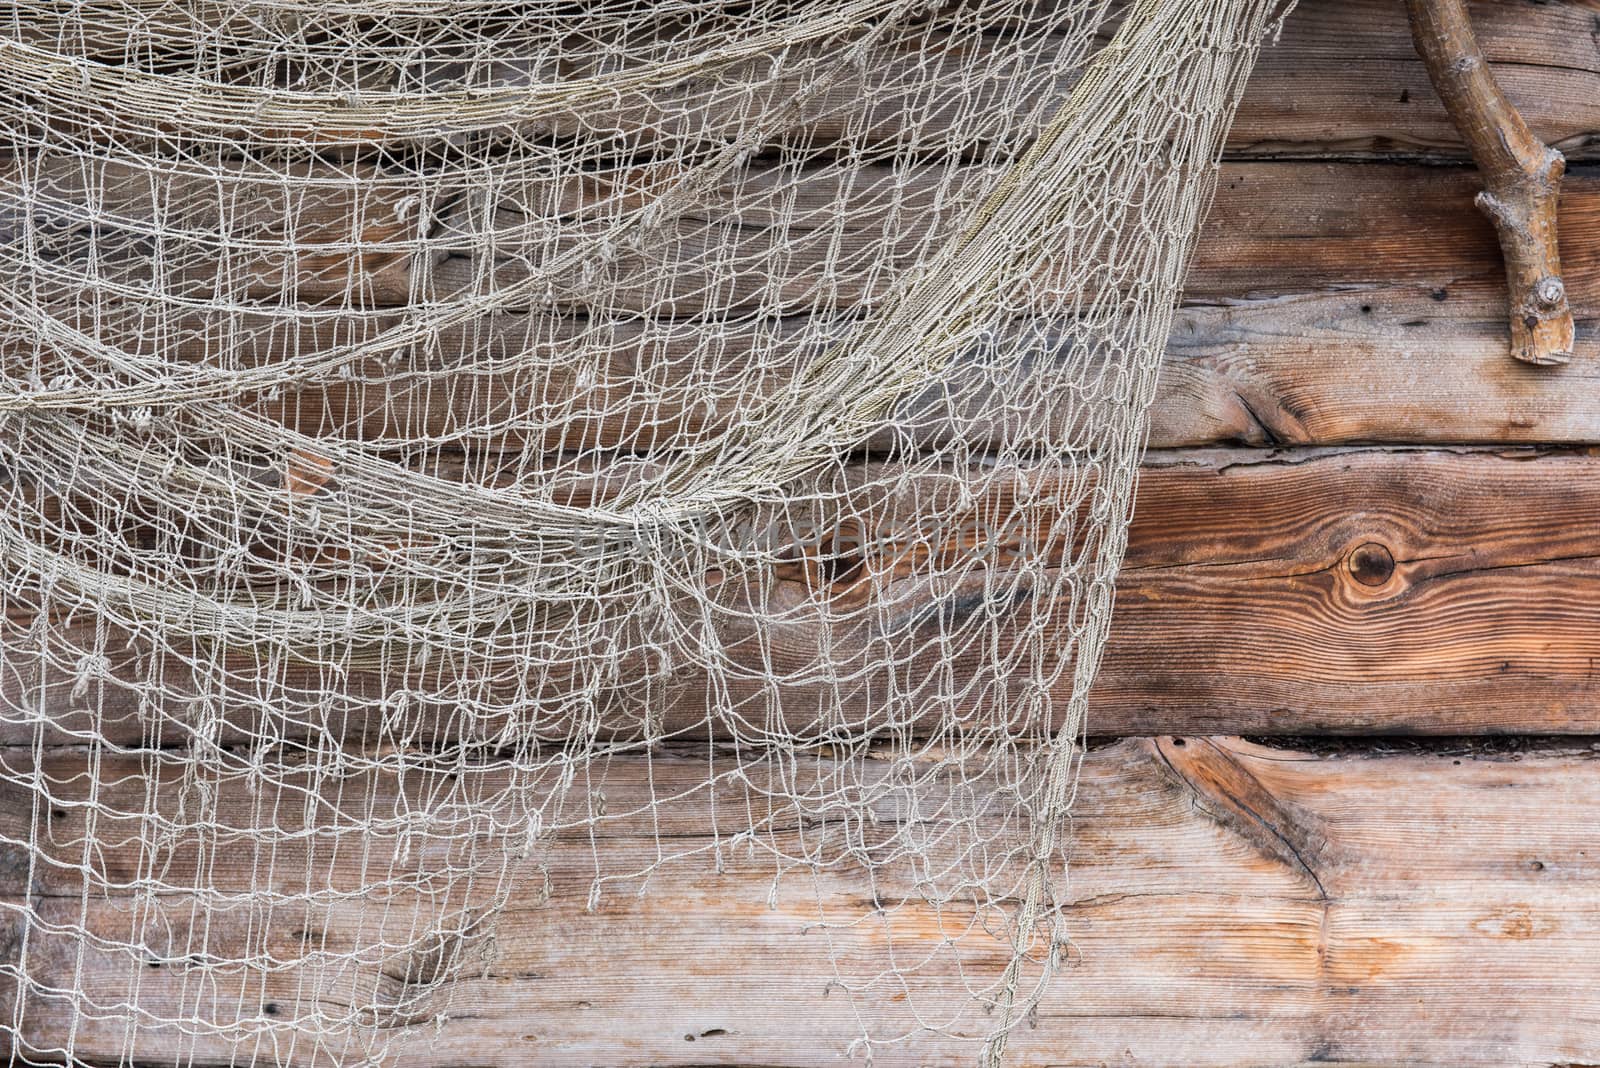 Fishing old network on wooden wall, fishing net texture of fisherman folk, woven with nylon rope.